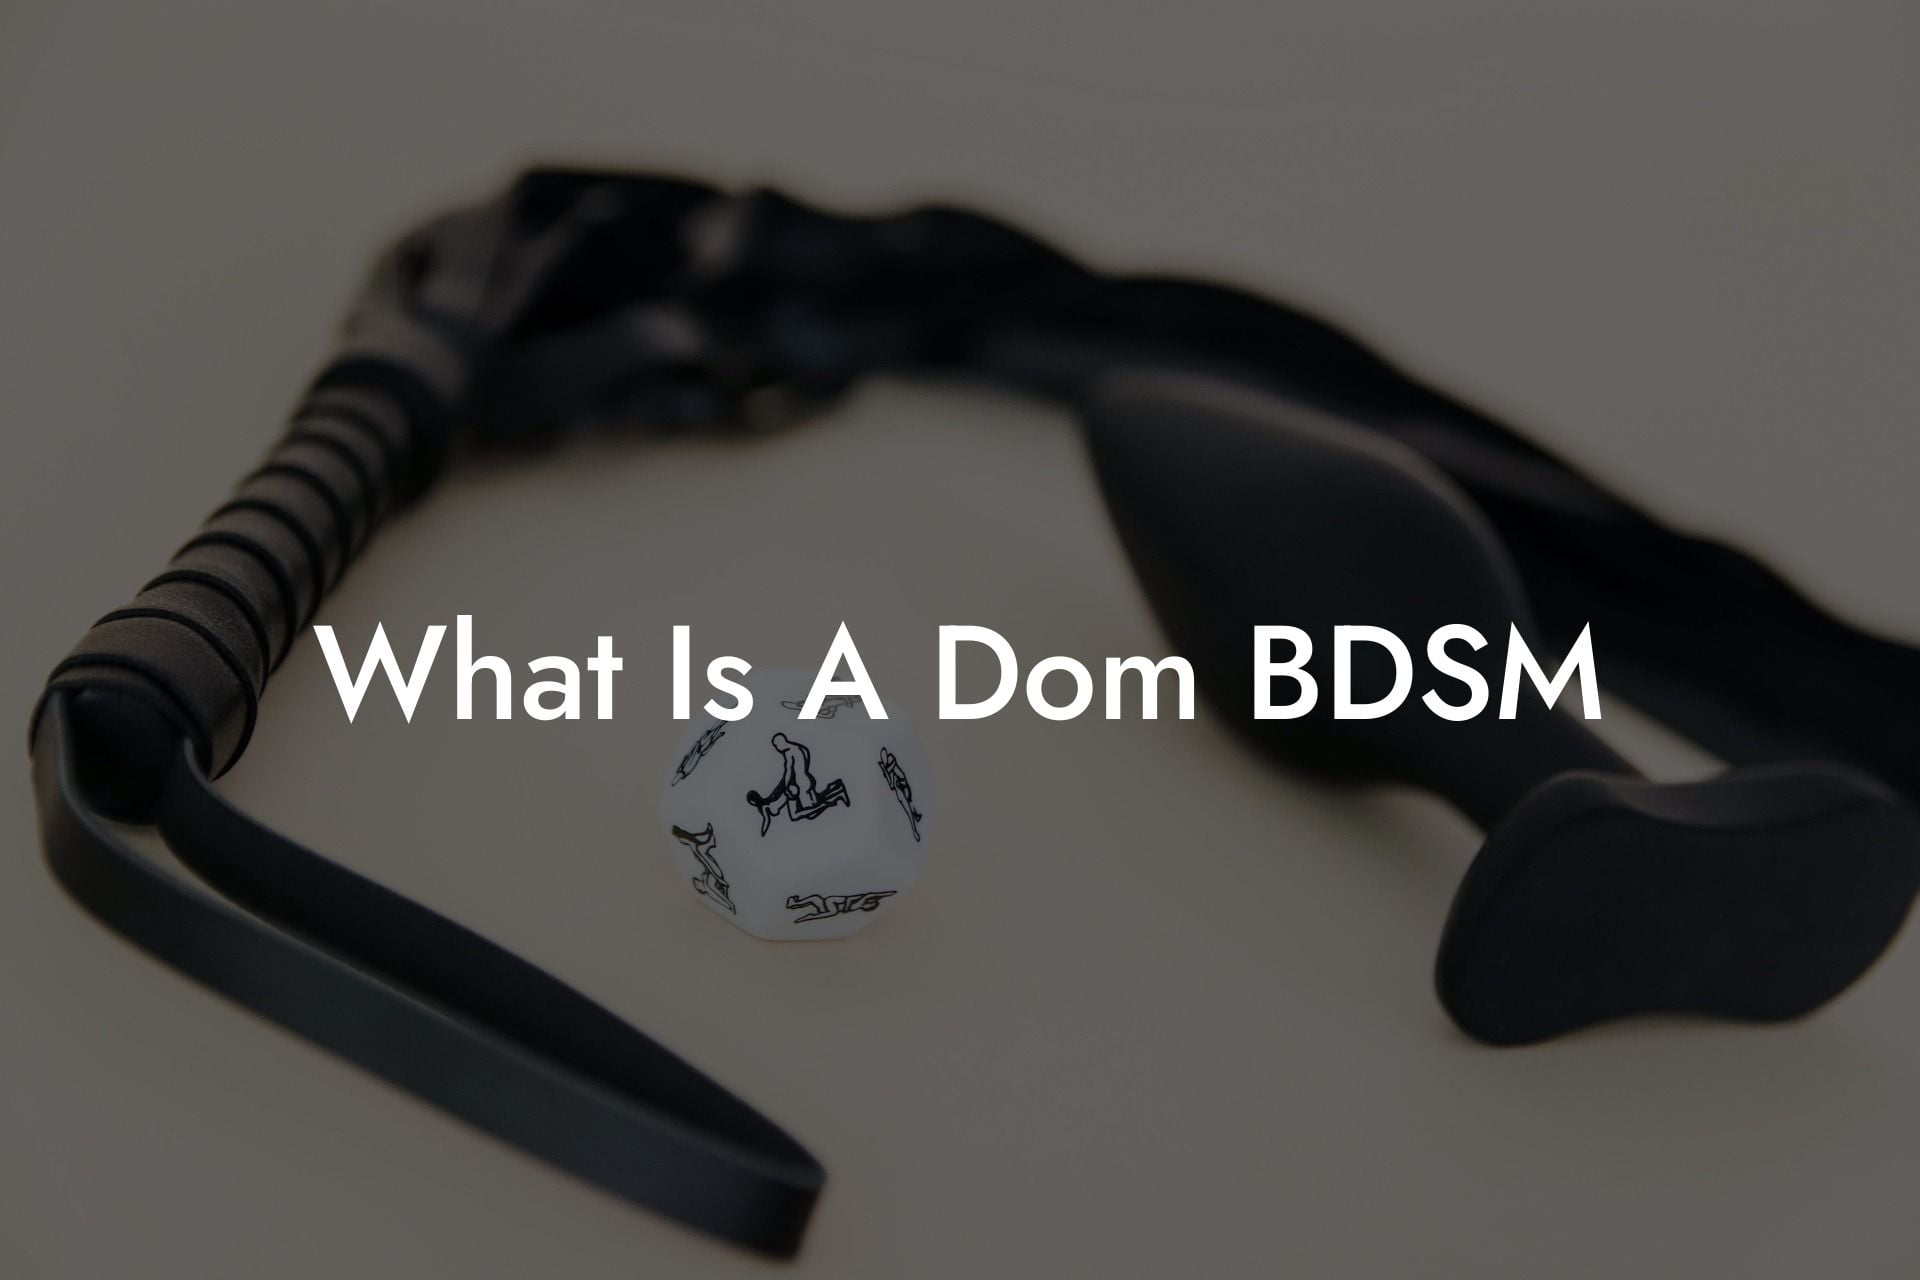 What Is A Dom BDSM